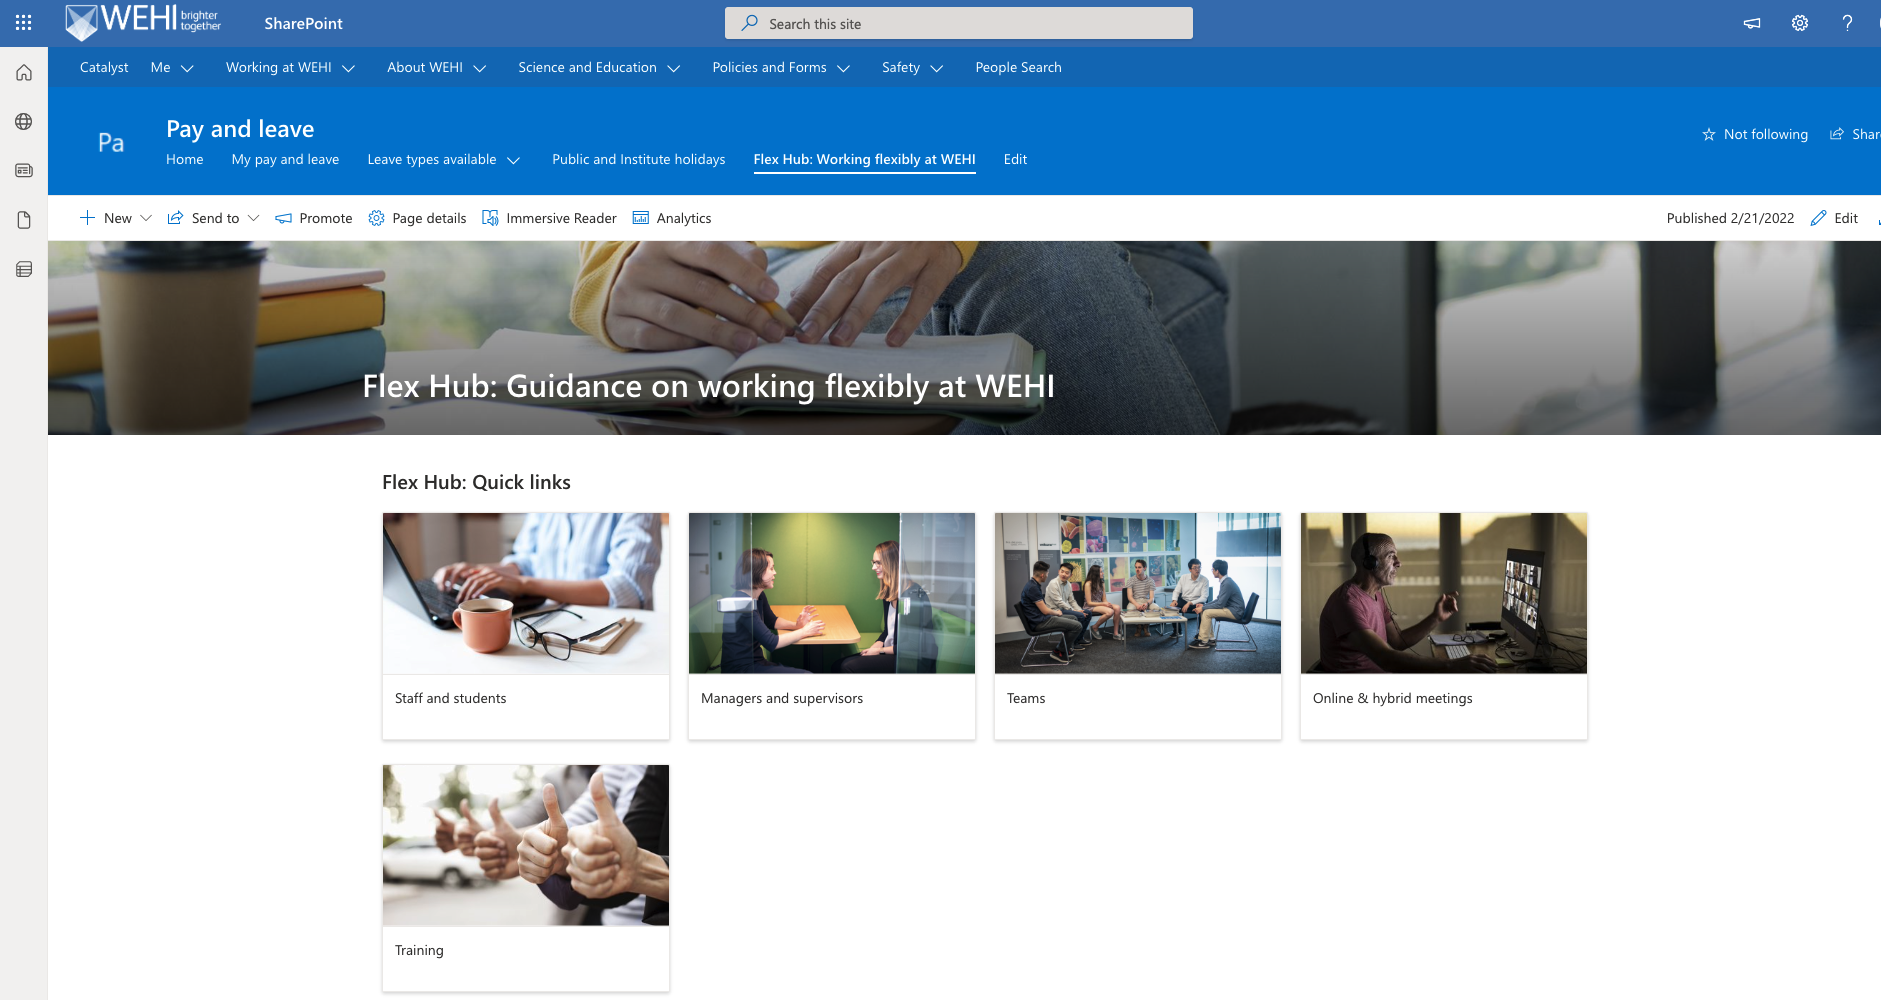 Screenshot of WEHI SharePoint site. The simple interface provides links for staff and students, managers, teams, online/hybrid meetings, and training.